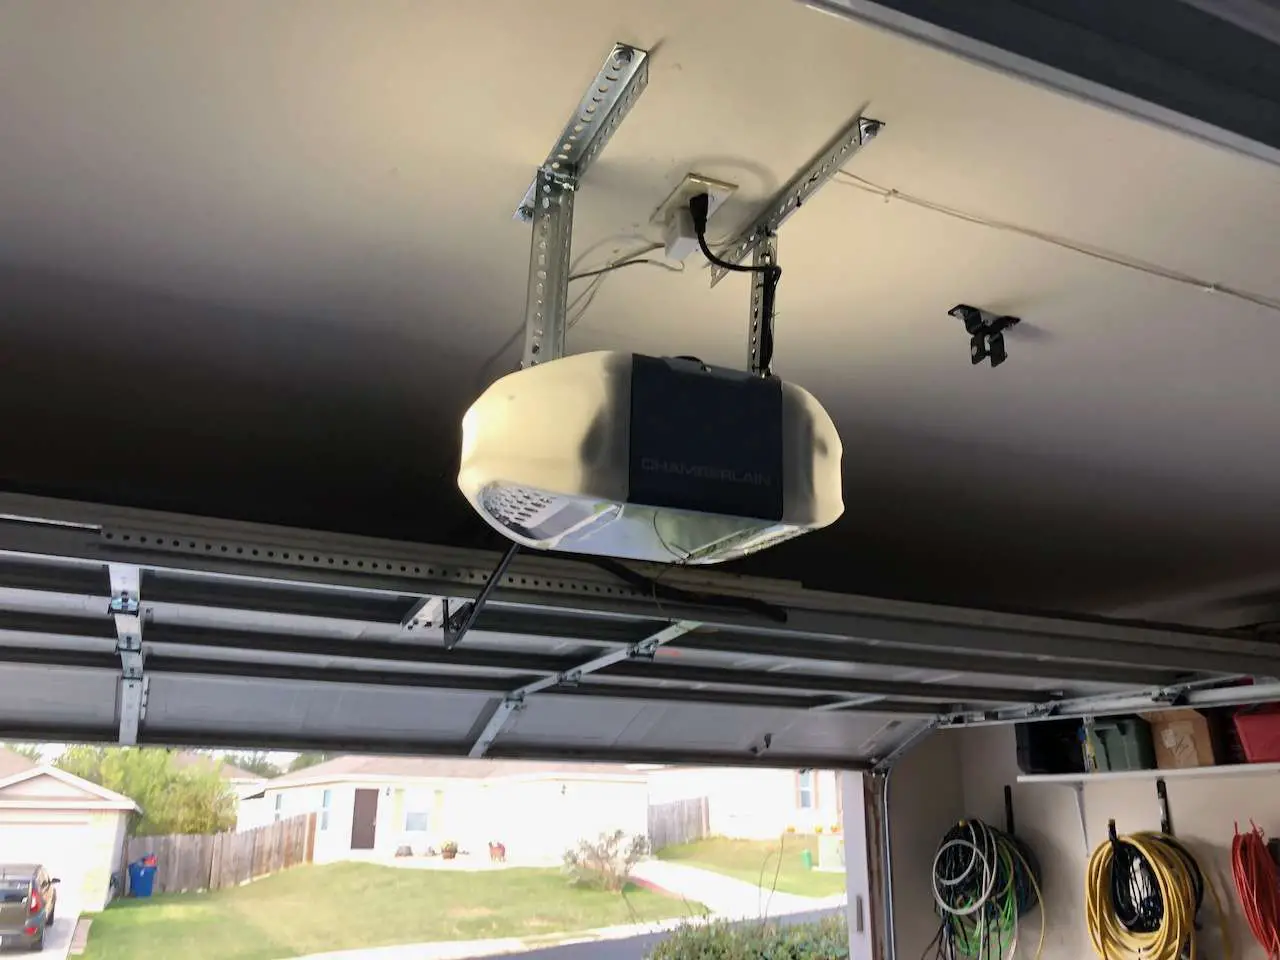 Liftmaster Garage Door Opener Opens and Closes on Its Own